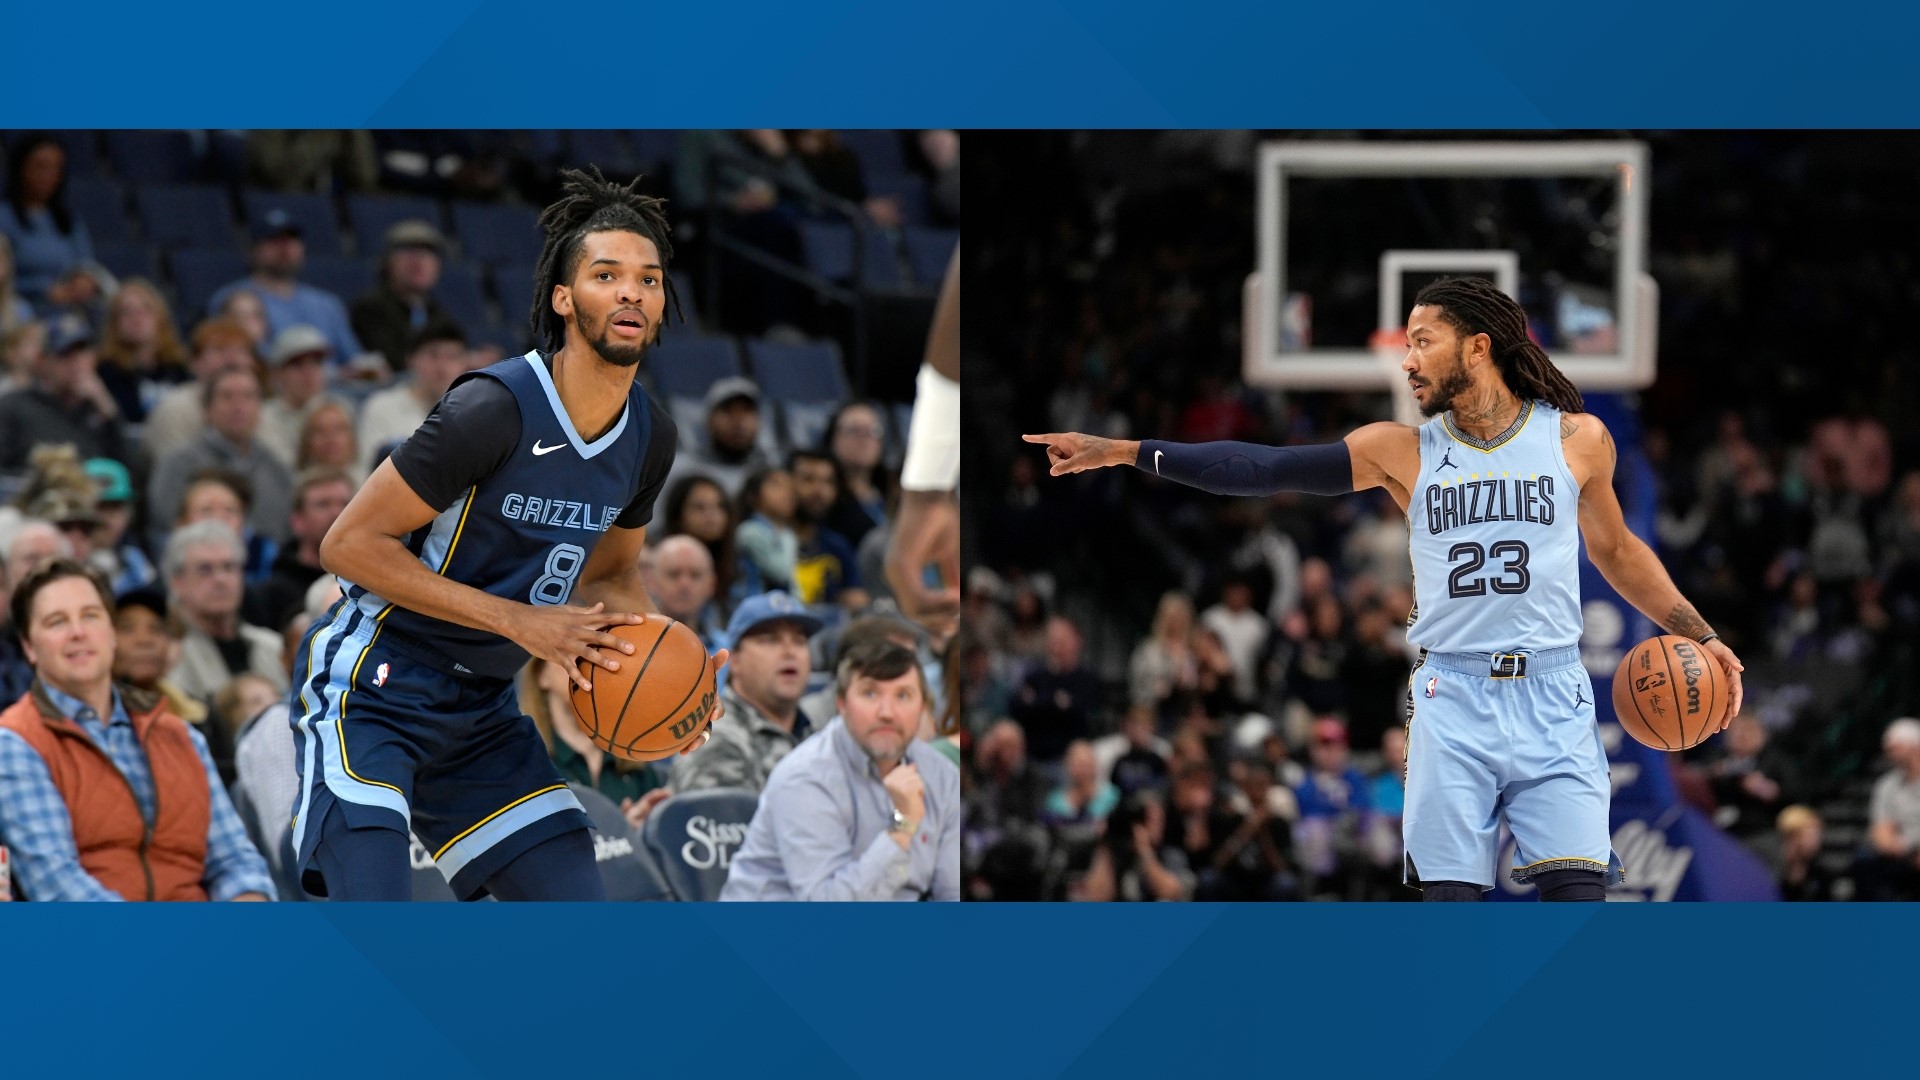 Ziaire Williams and Derrick Rose will be out for weeks due to injuries, the Grizzlies announced.